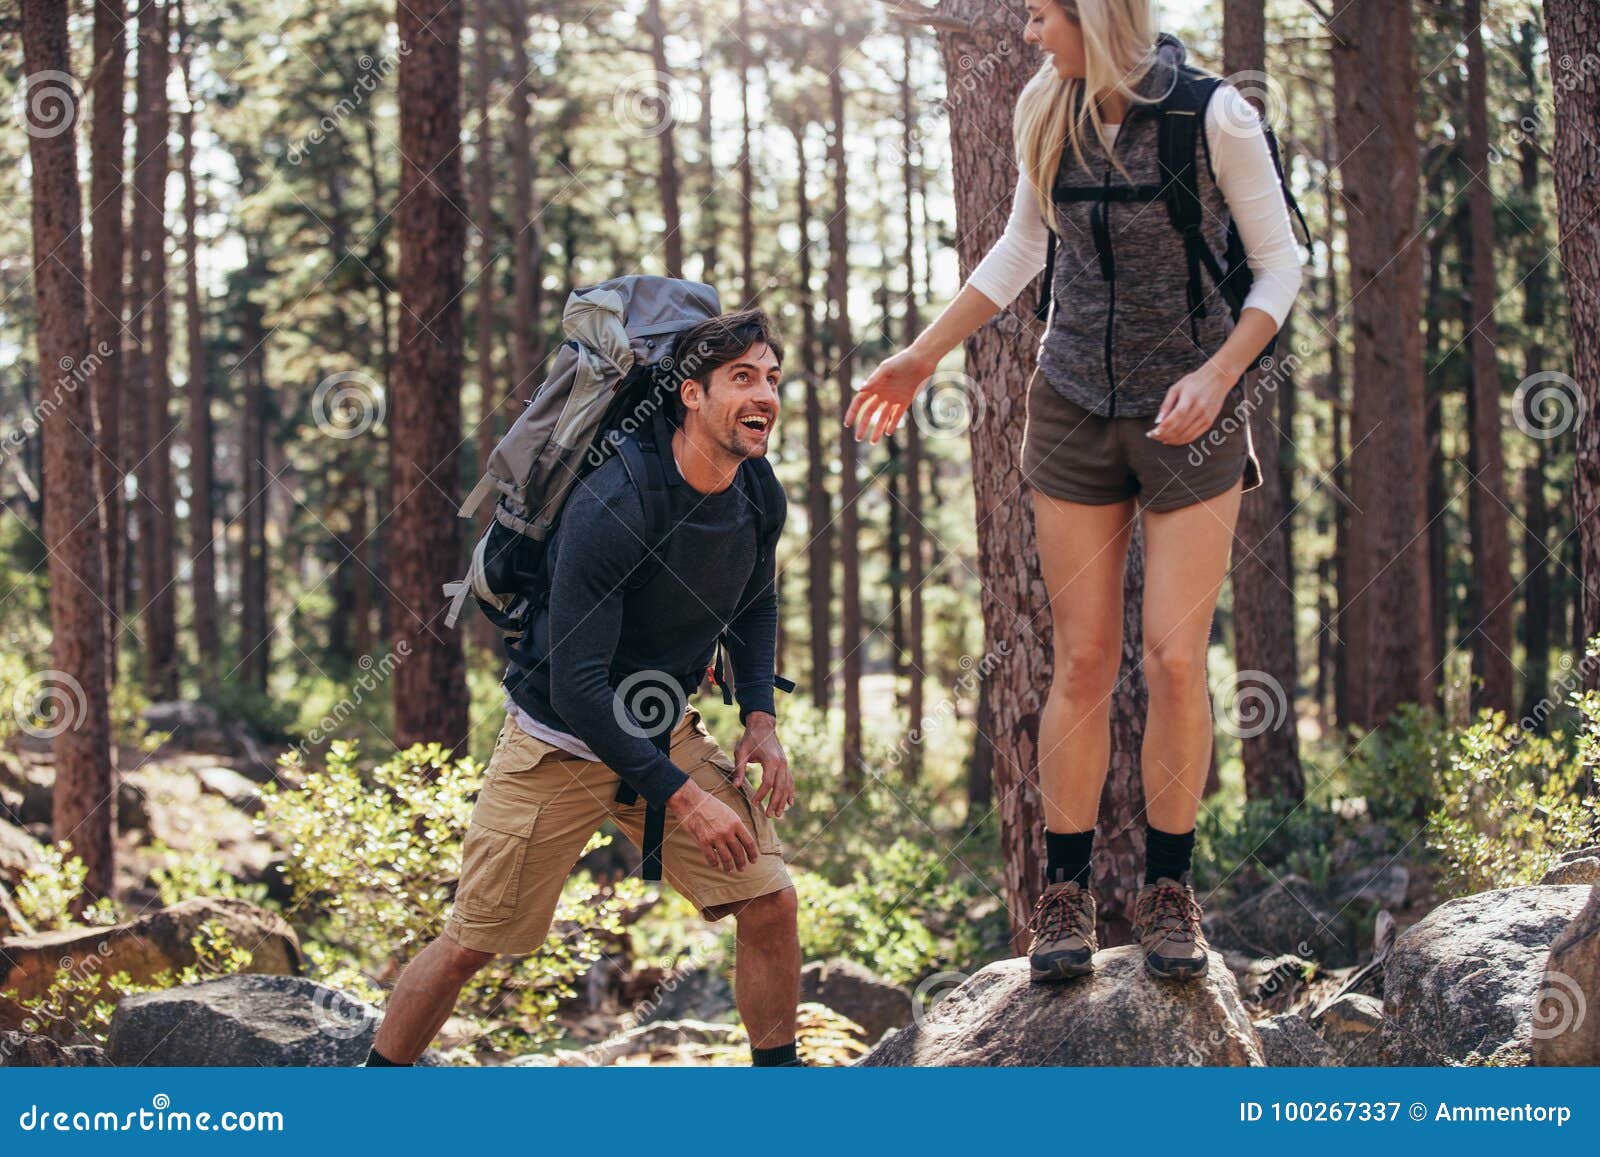 Hiking Couple Walking On Rocks In Forest Wearing Backpacks Stock Image Image Of Sunny Rocks